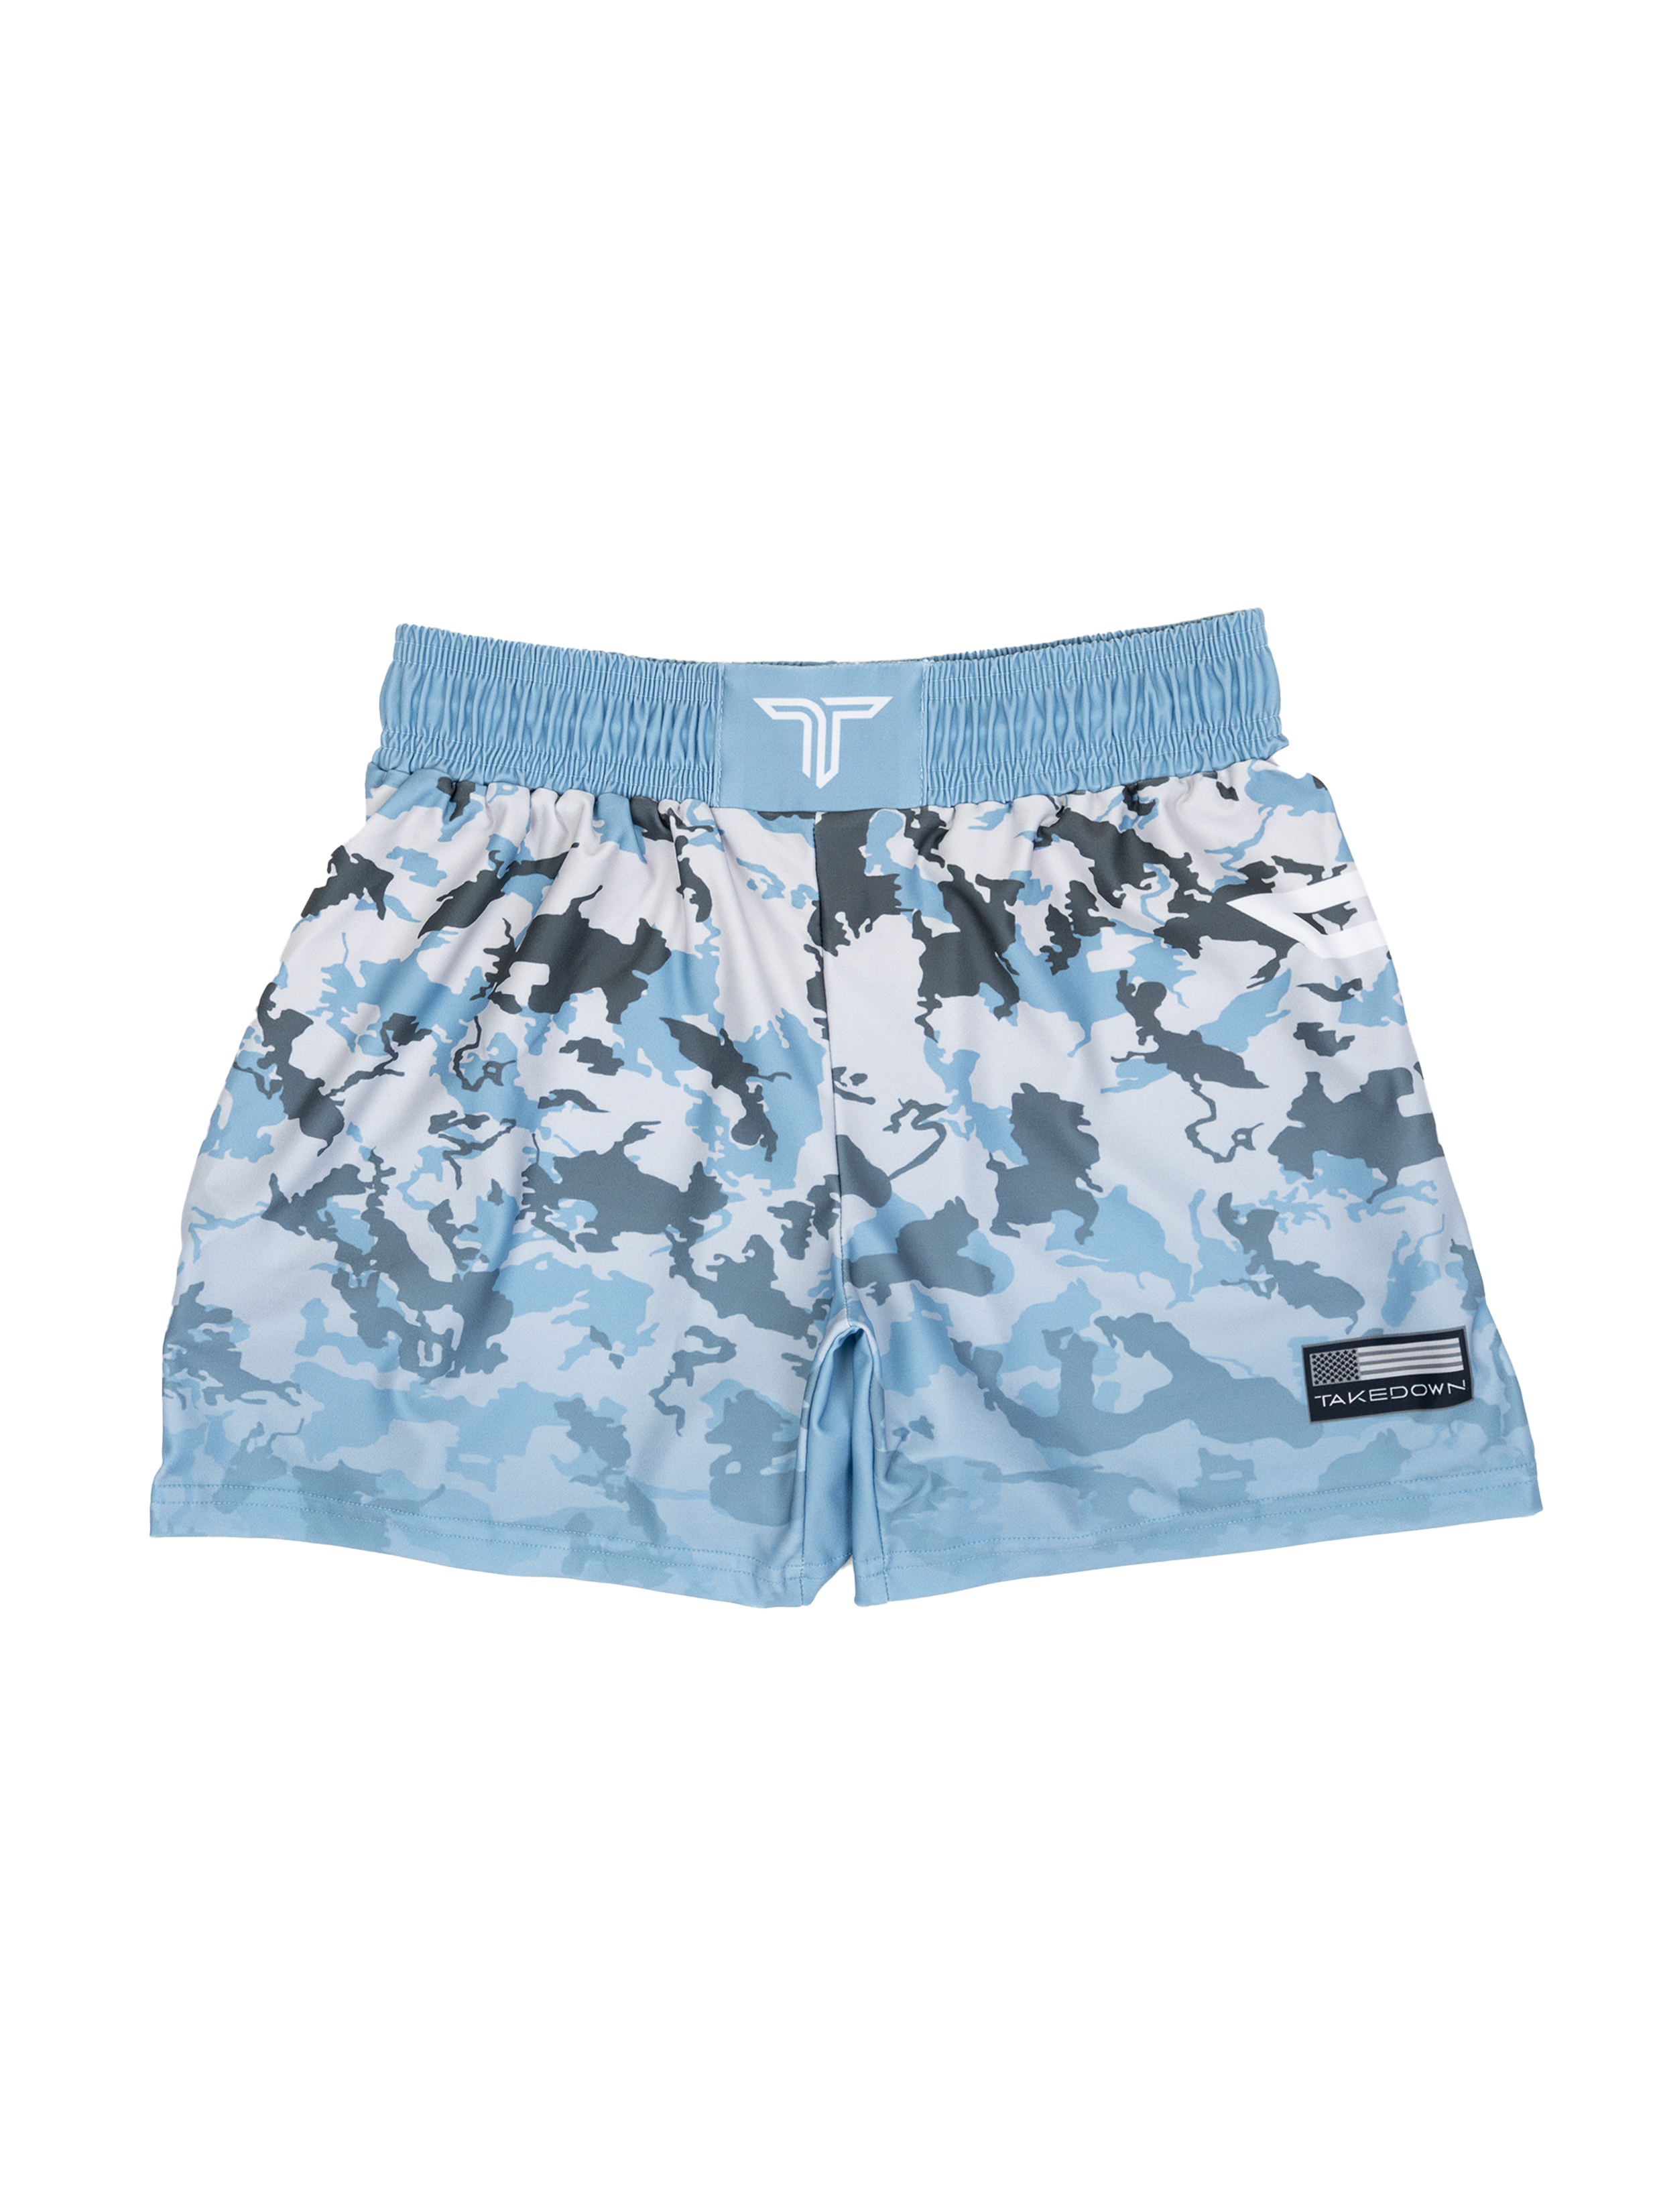 Particle Camo Women's Fight Shorts - Ice Blue (3